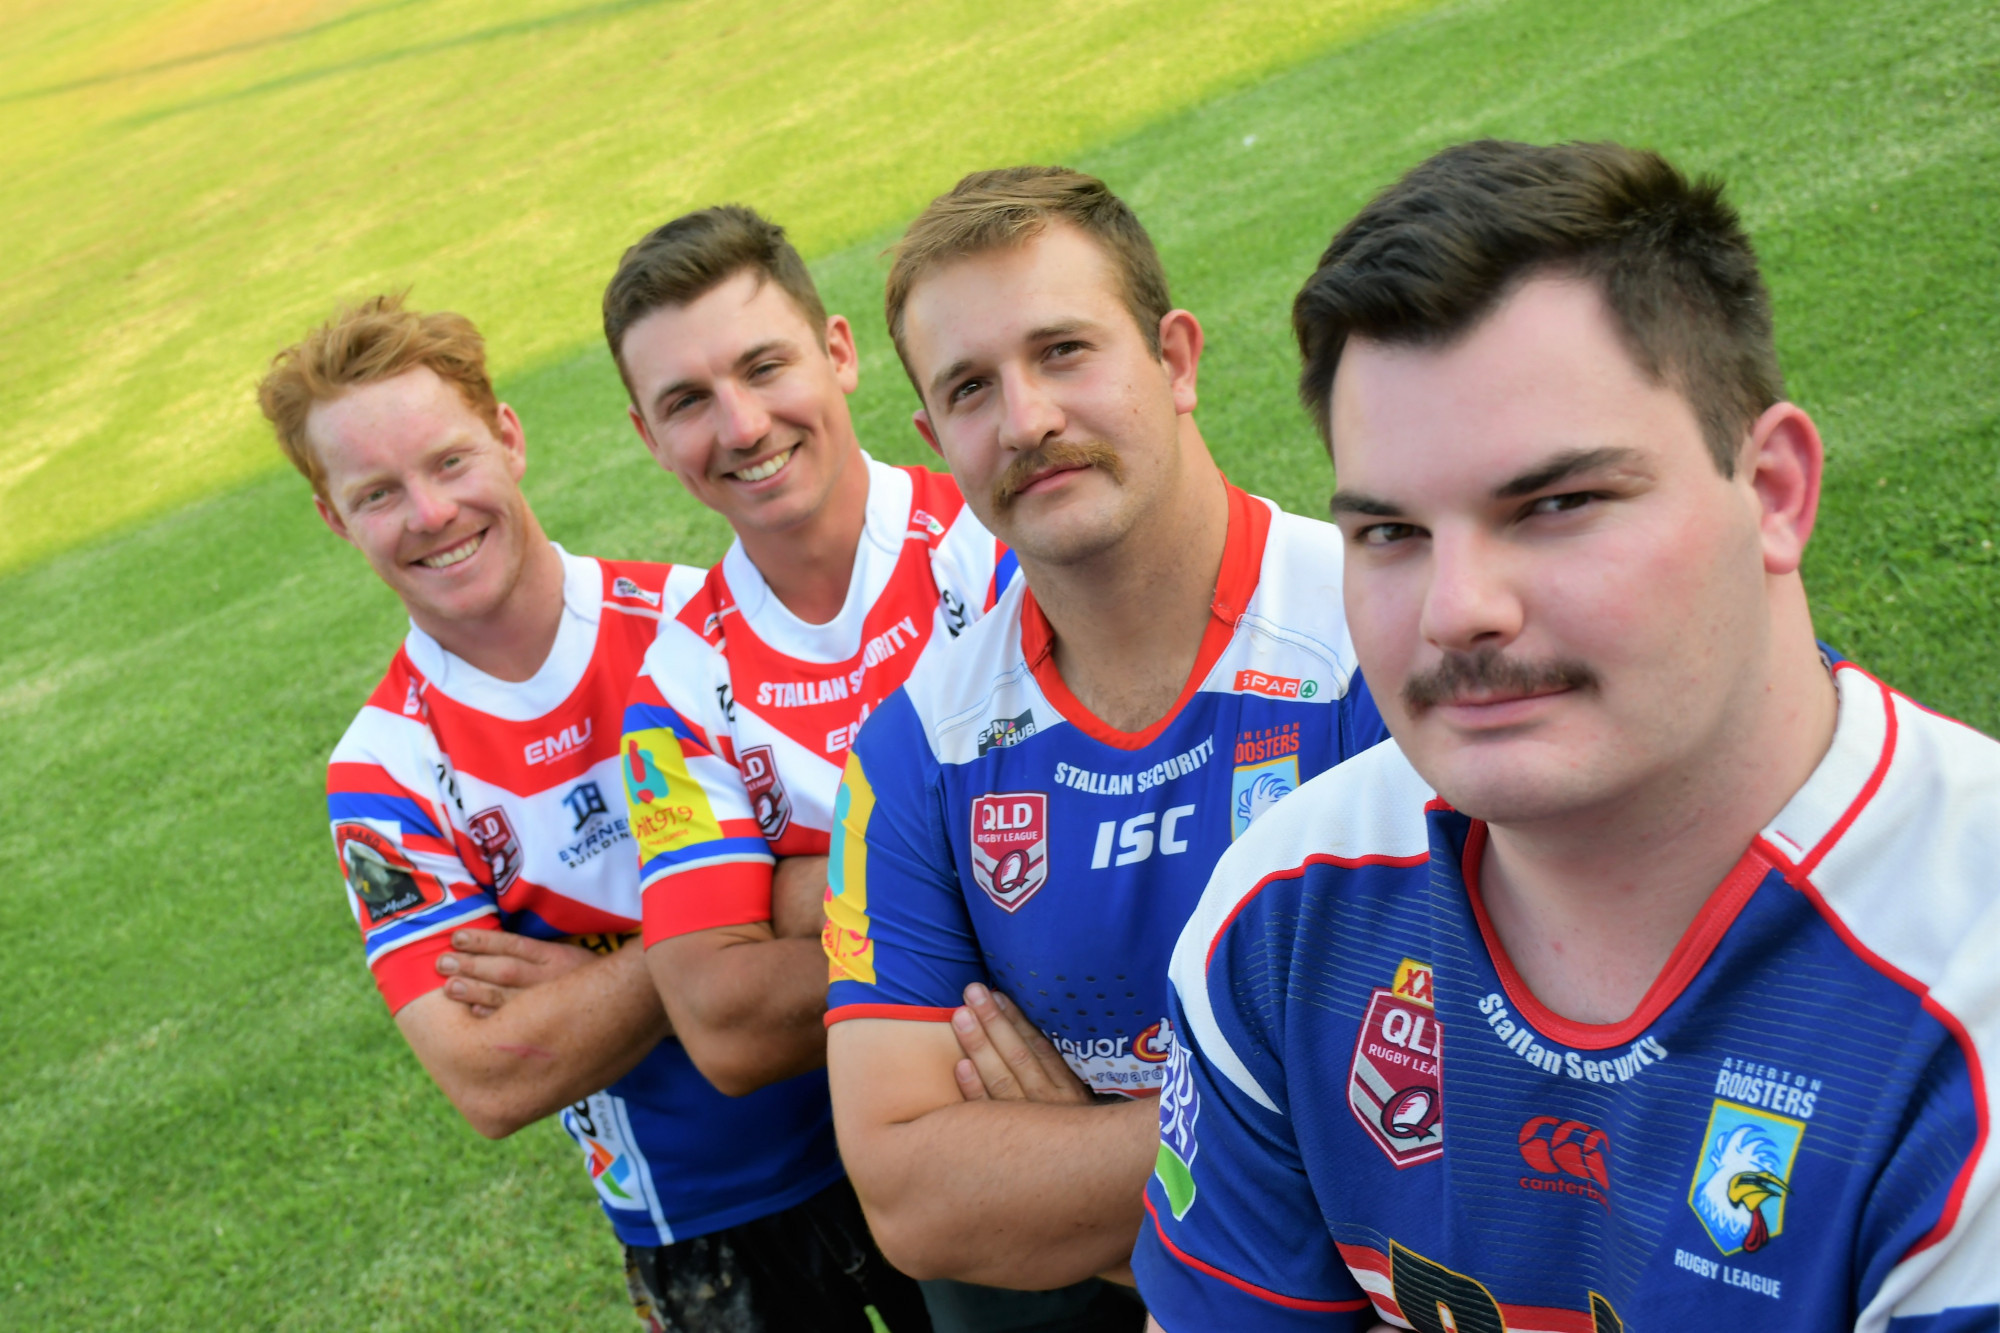 NO SHAVE: Adam Molloy, Ned Blackman, Anthony Curcio and Luke La Rosa are all growing a mo in support of Movember.